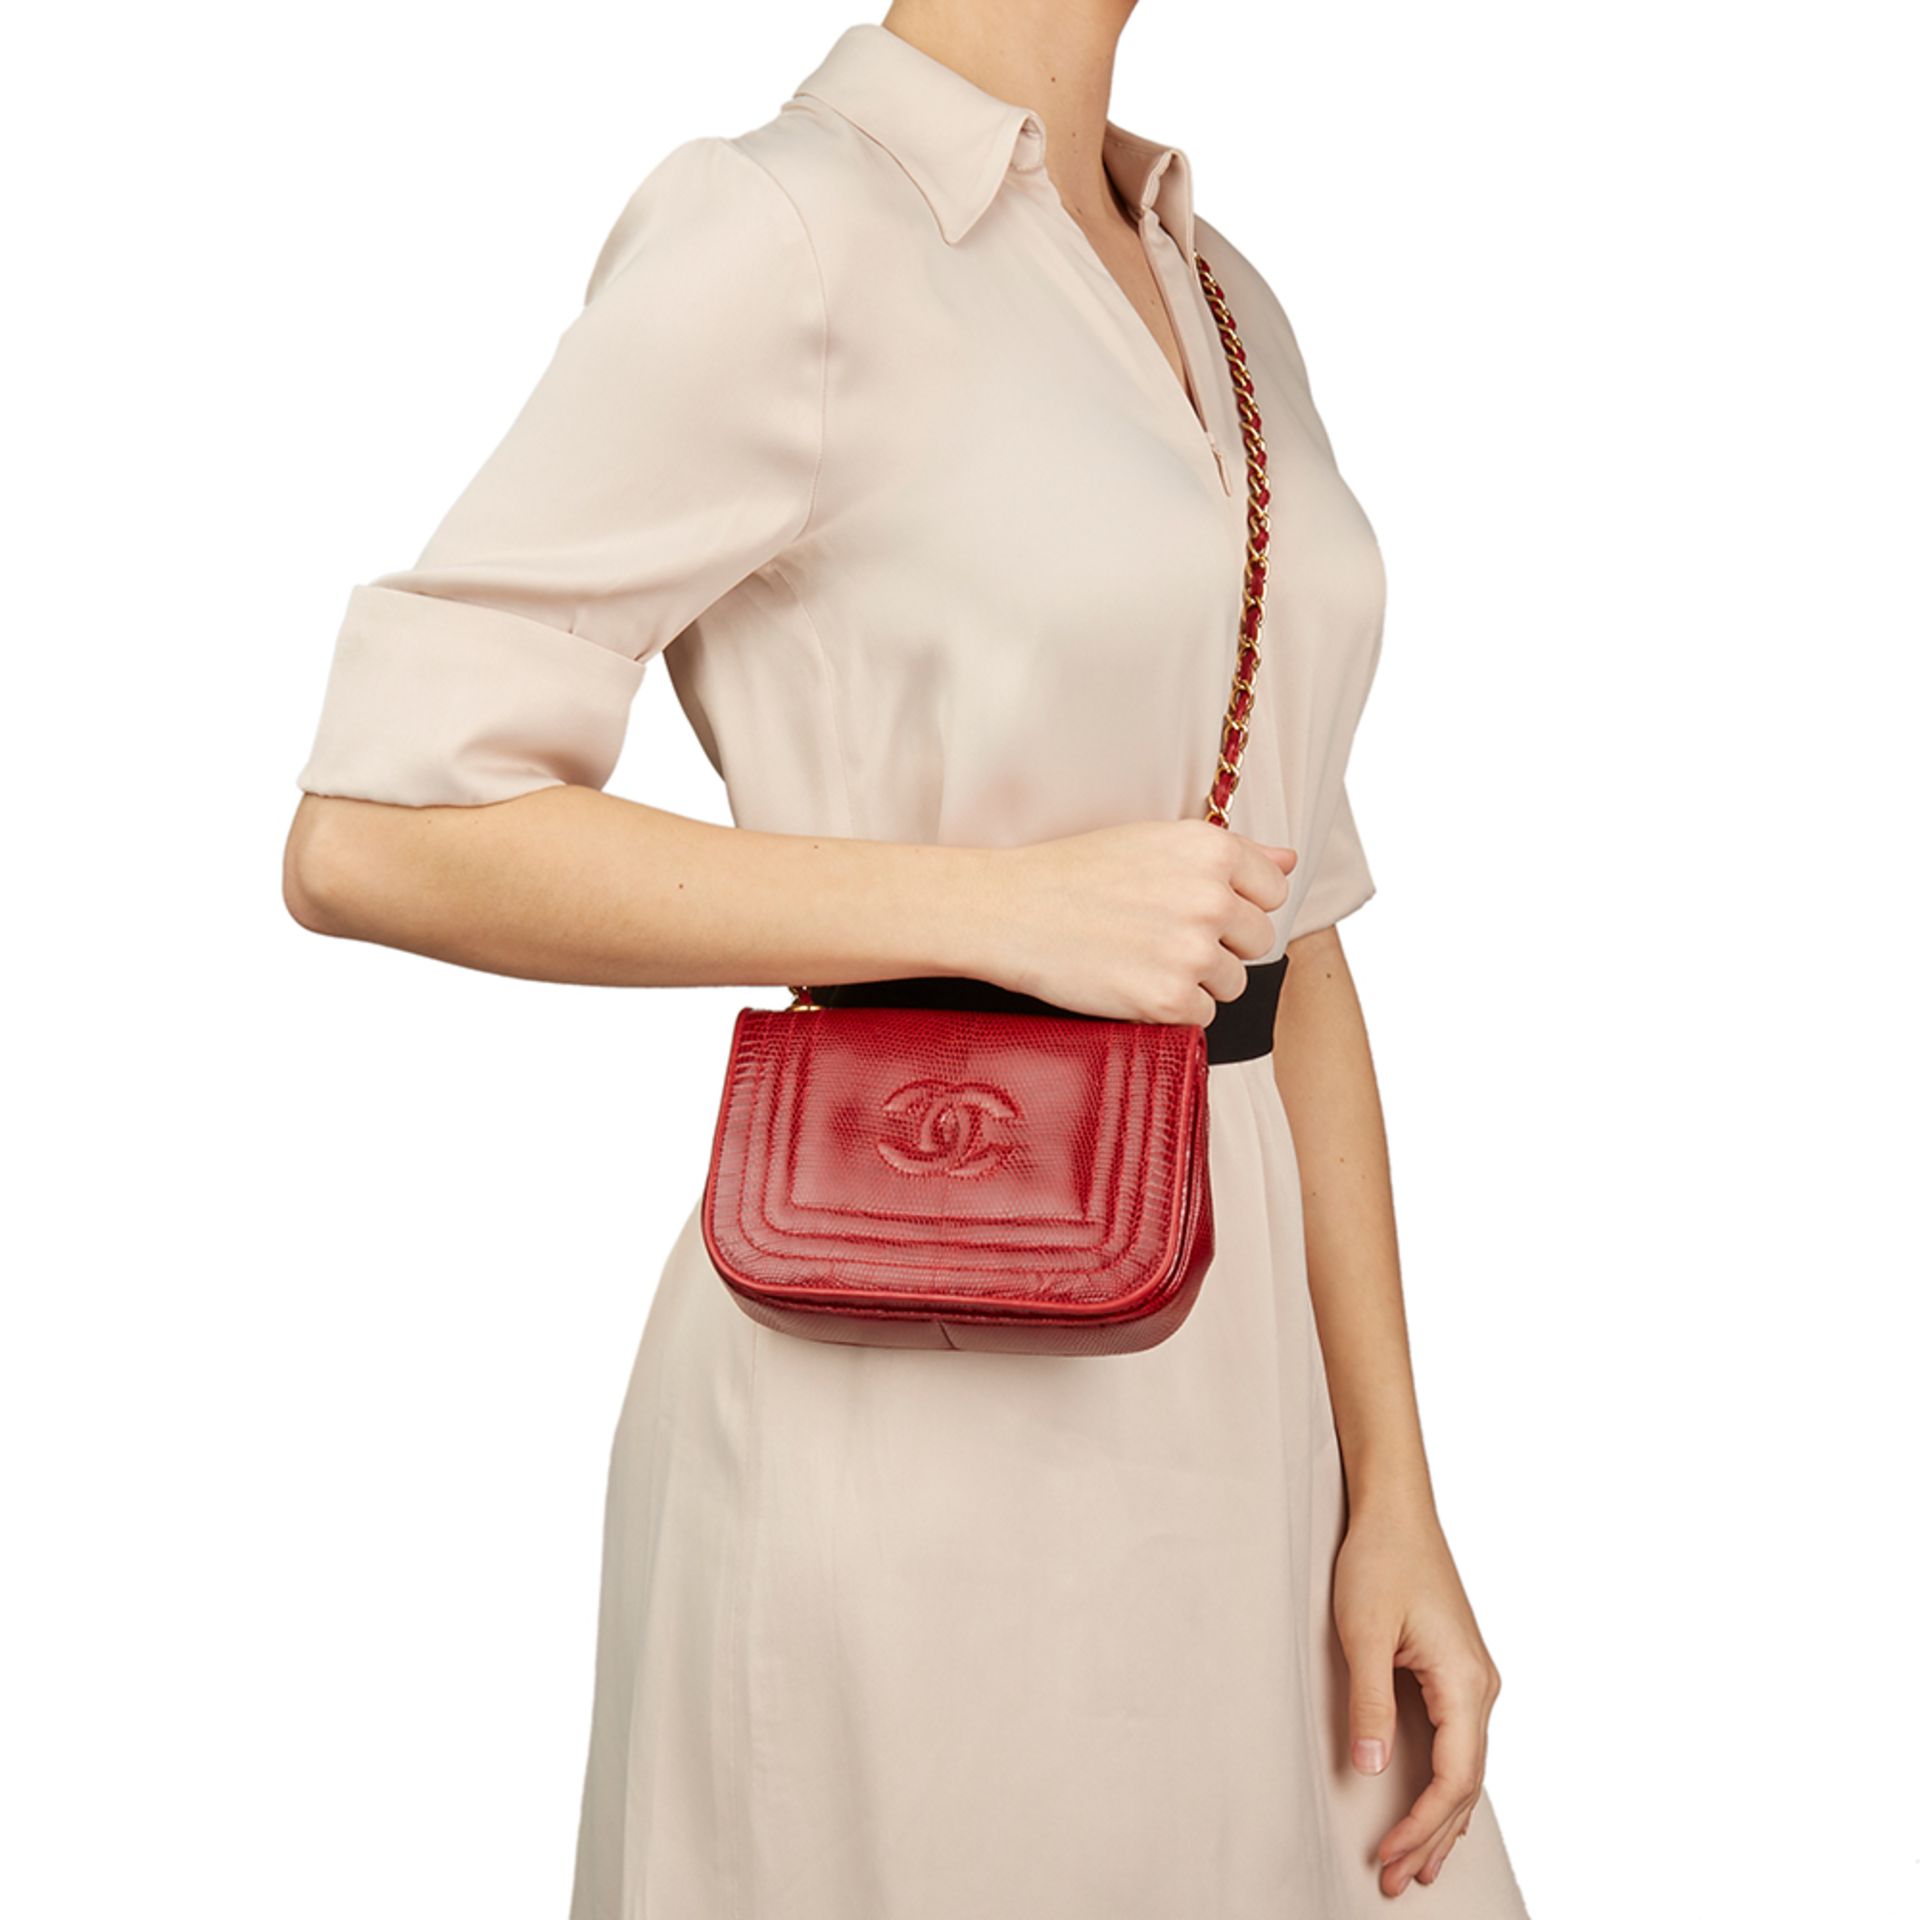 Chanel Red Lizard Leather Vintage Timeless Mini Flap Bag - Image 2 of 12